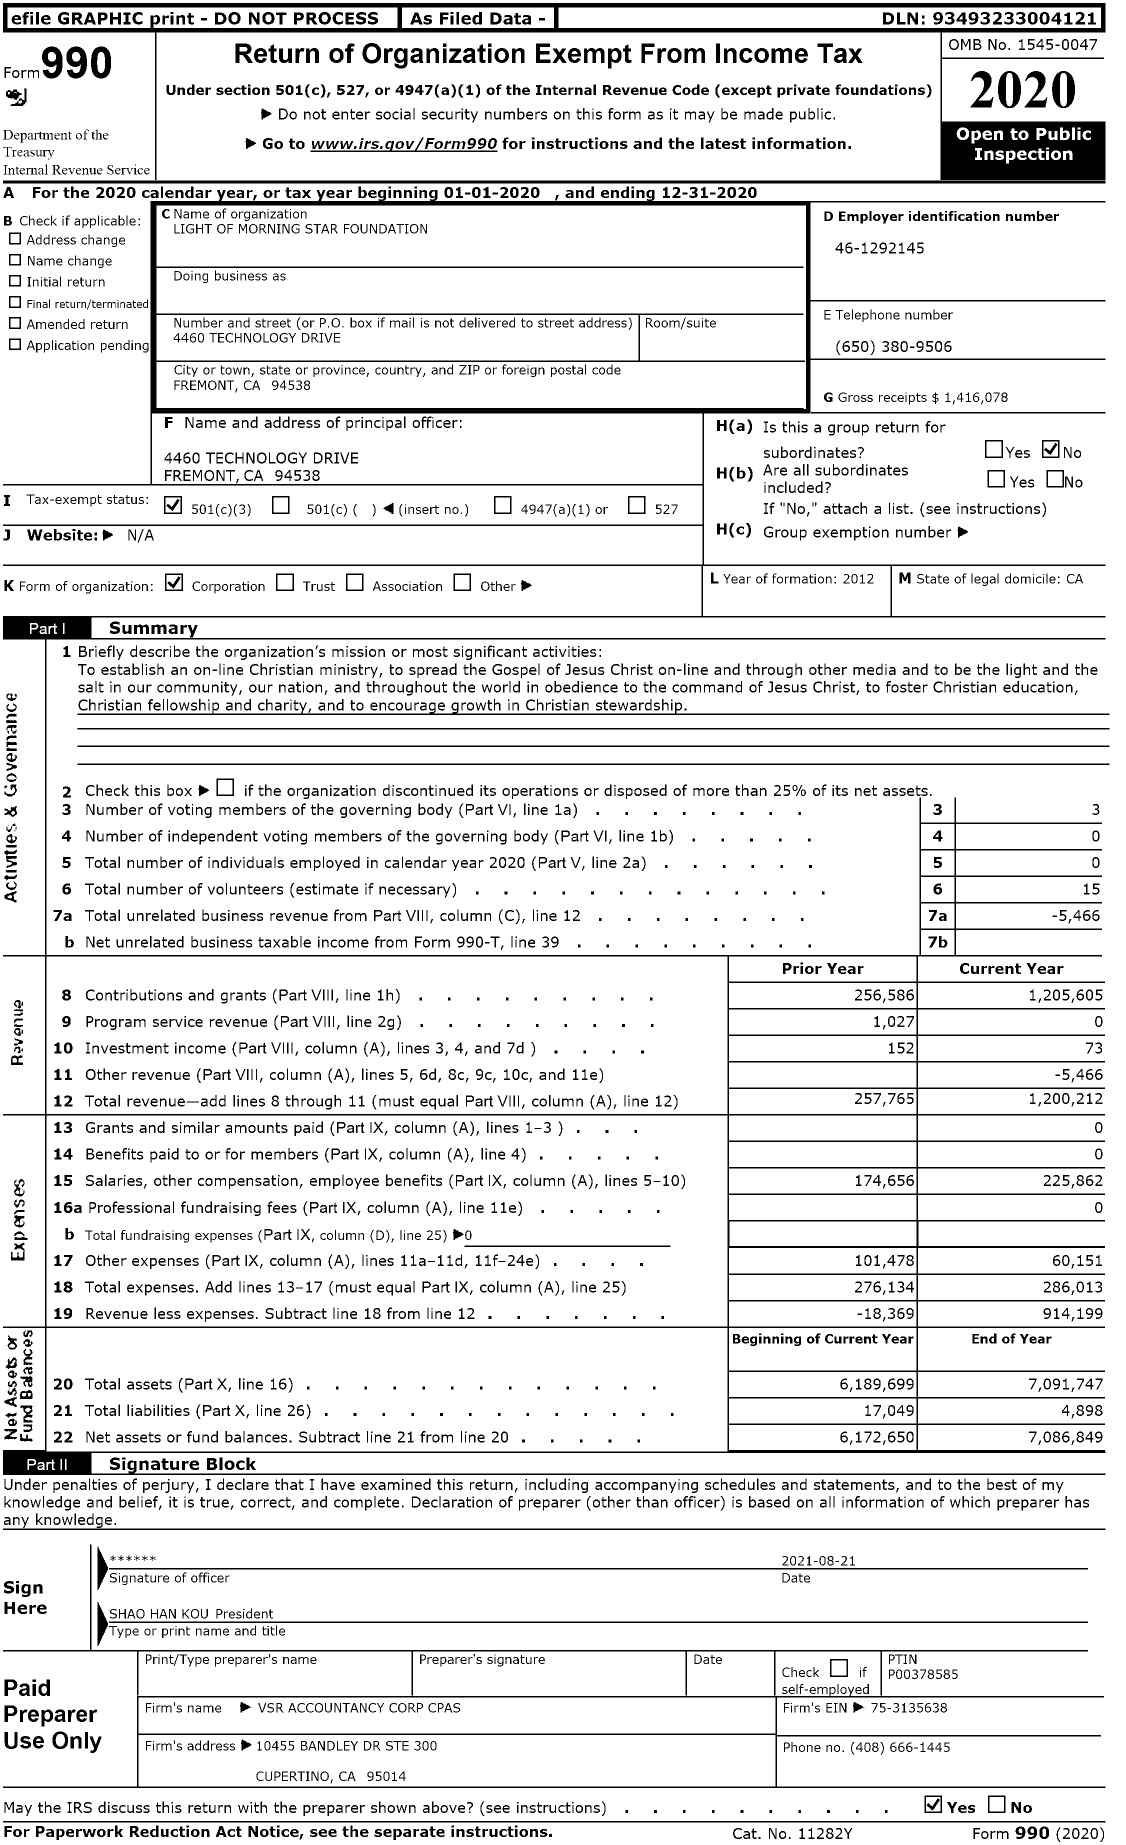 Image of first page of 2020 Form 990 for Light of Morning Star Foundation